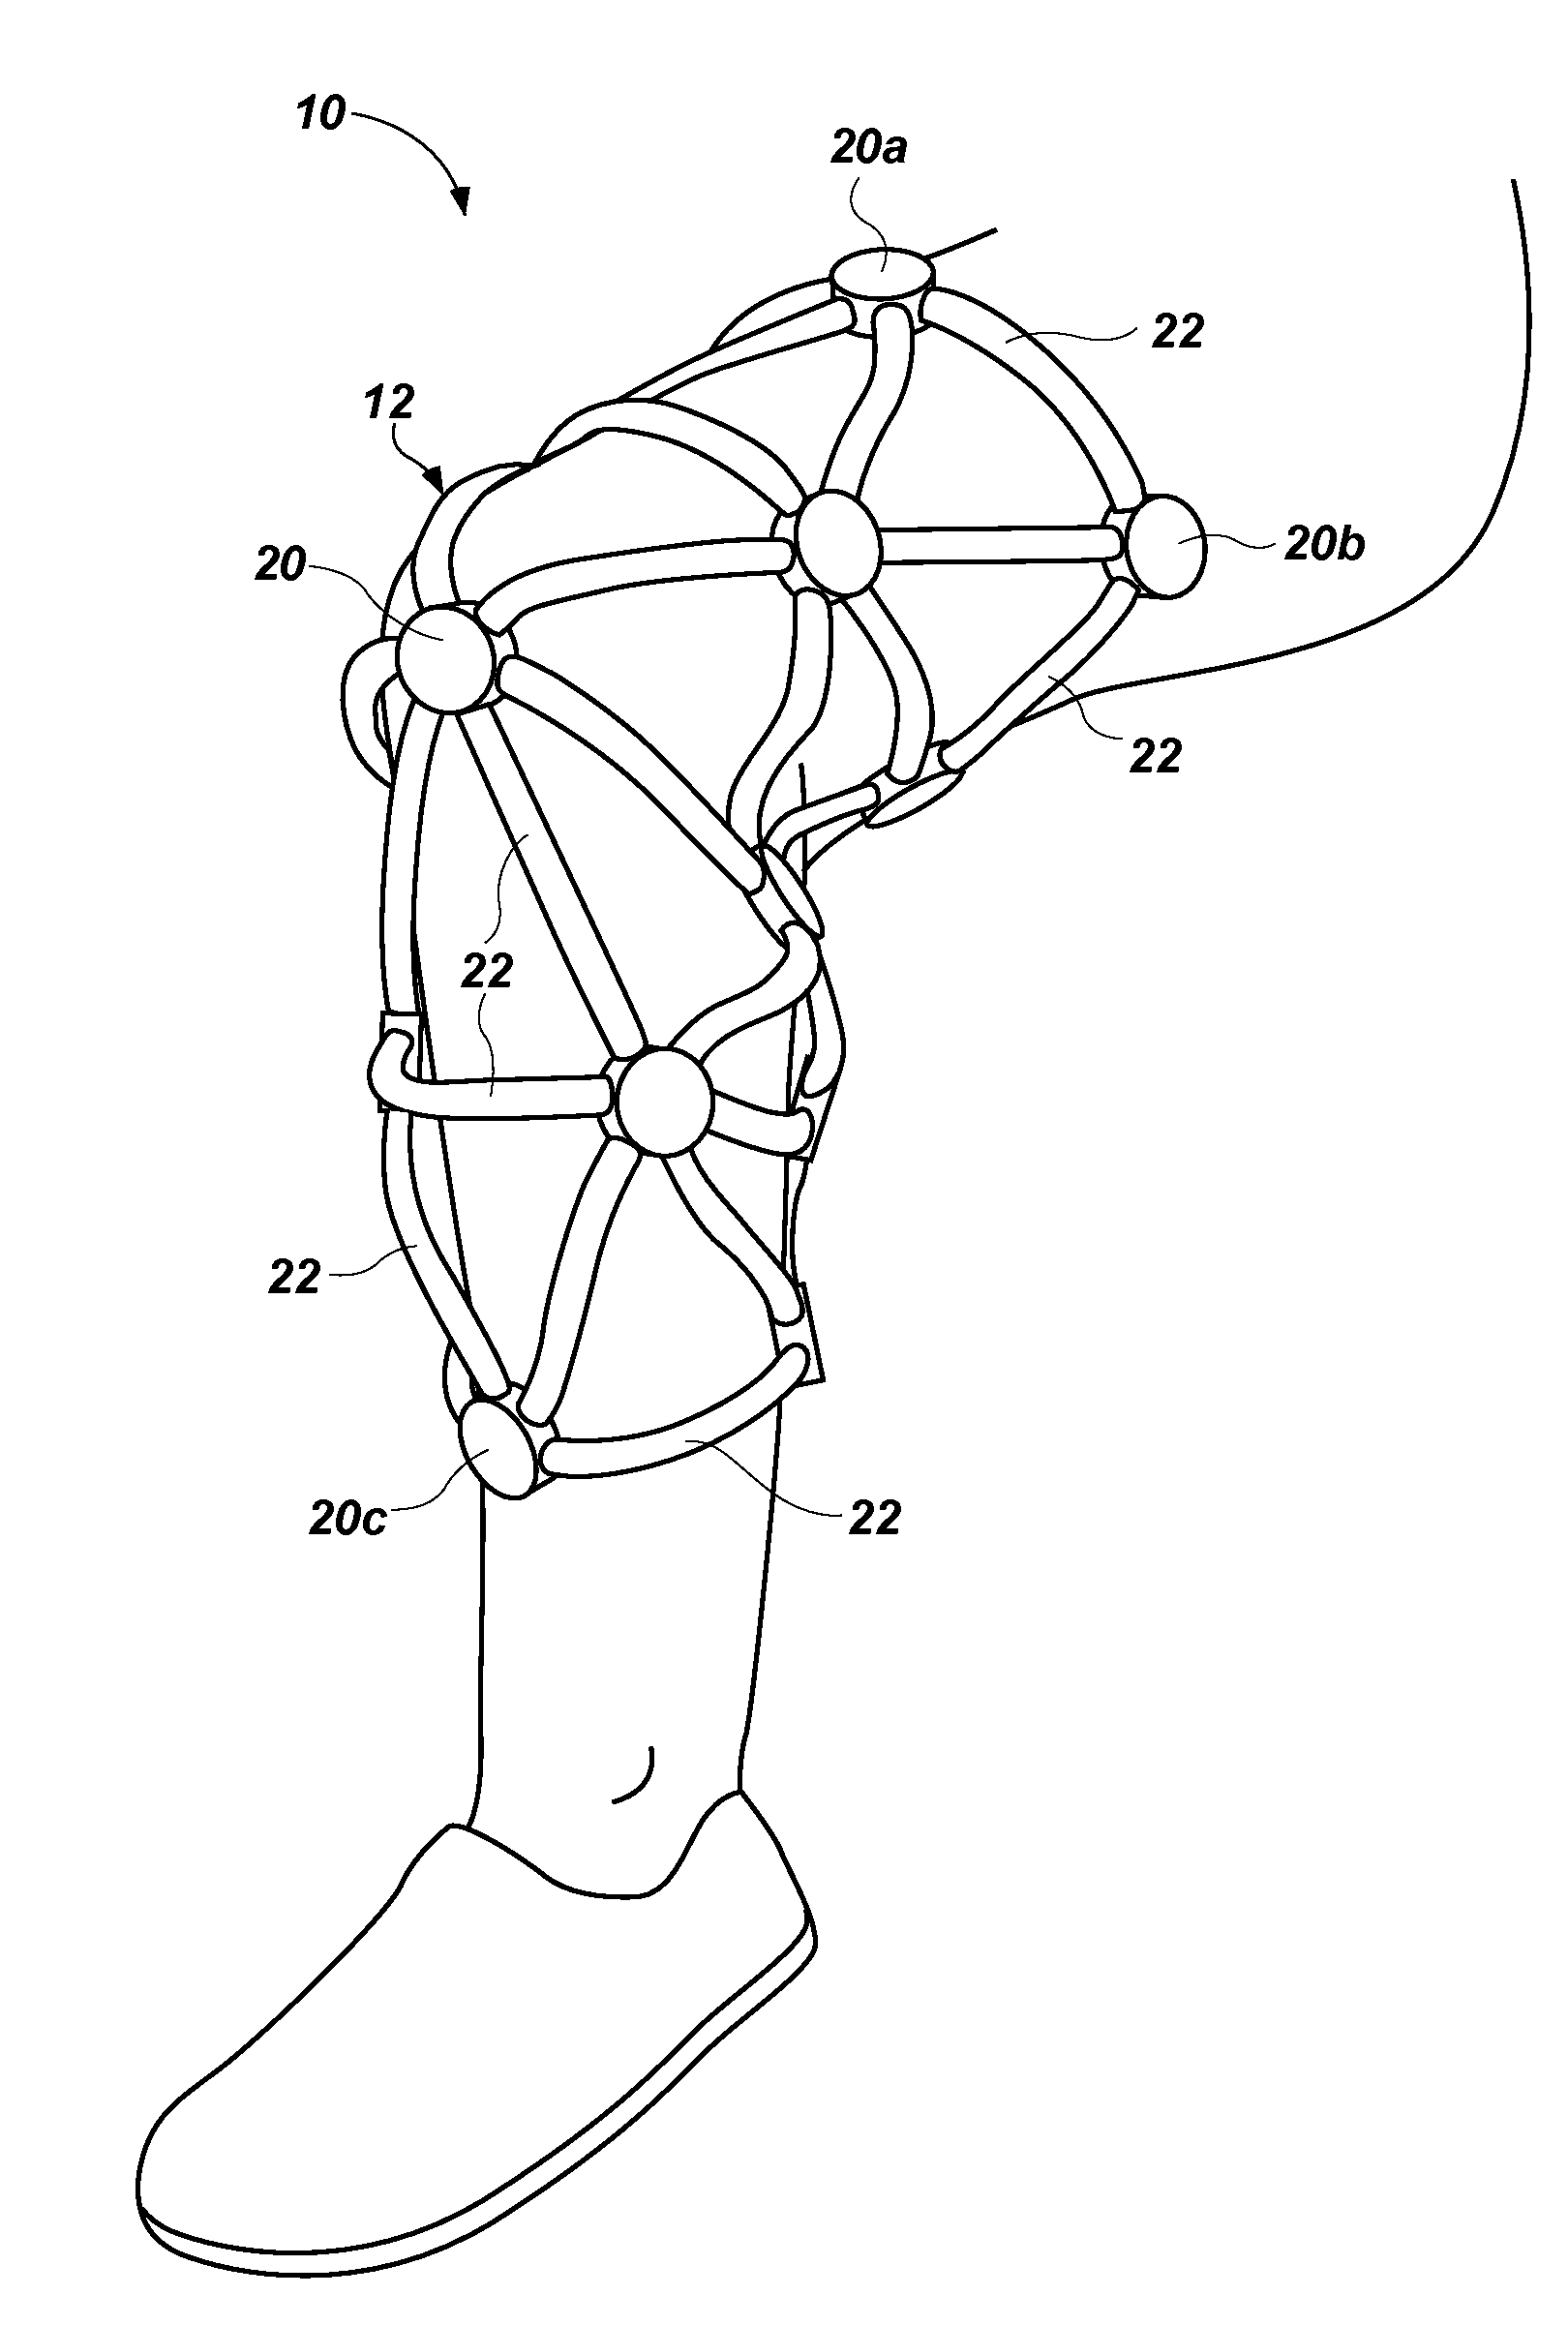 Immersive, flux-guided, micro-coil apparatus and method